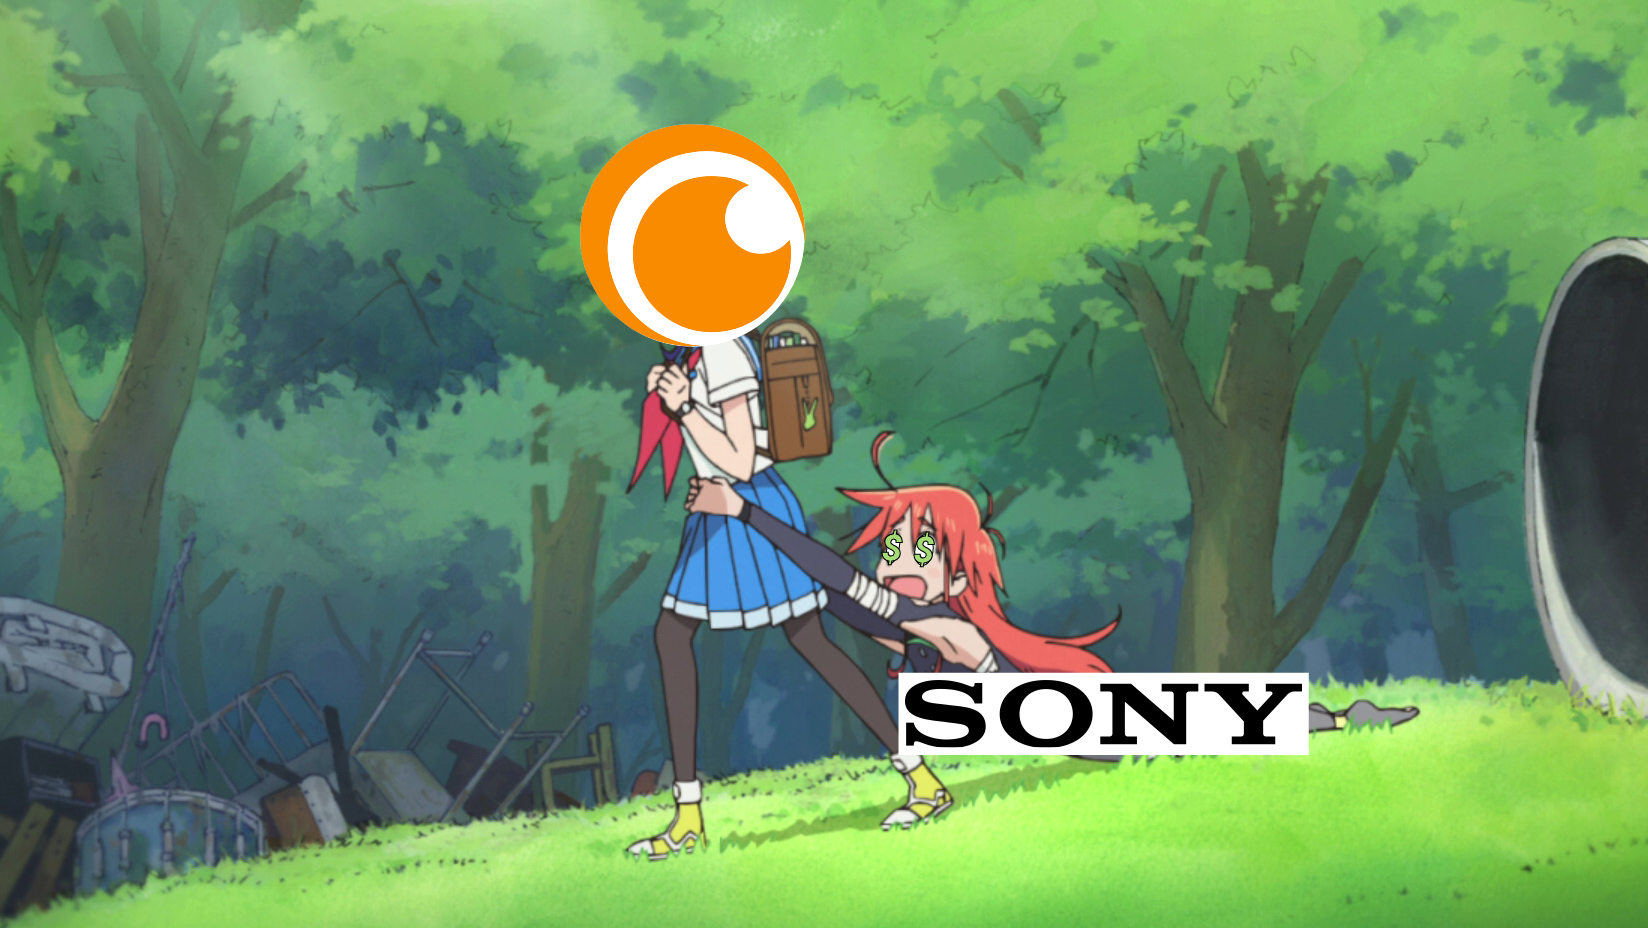 Sony S 1 Billion Acquisition Of Crunchyroll Is Now Official